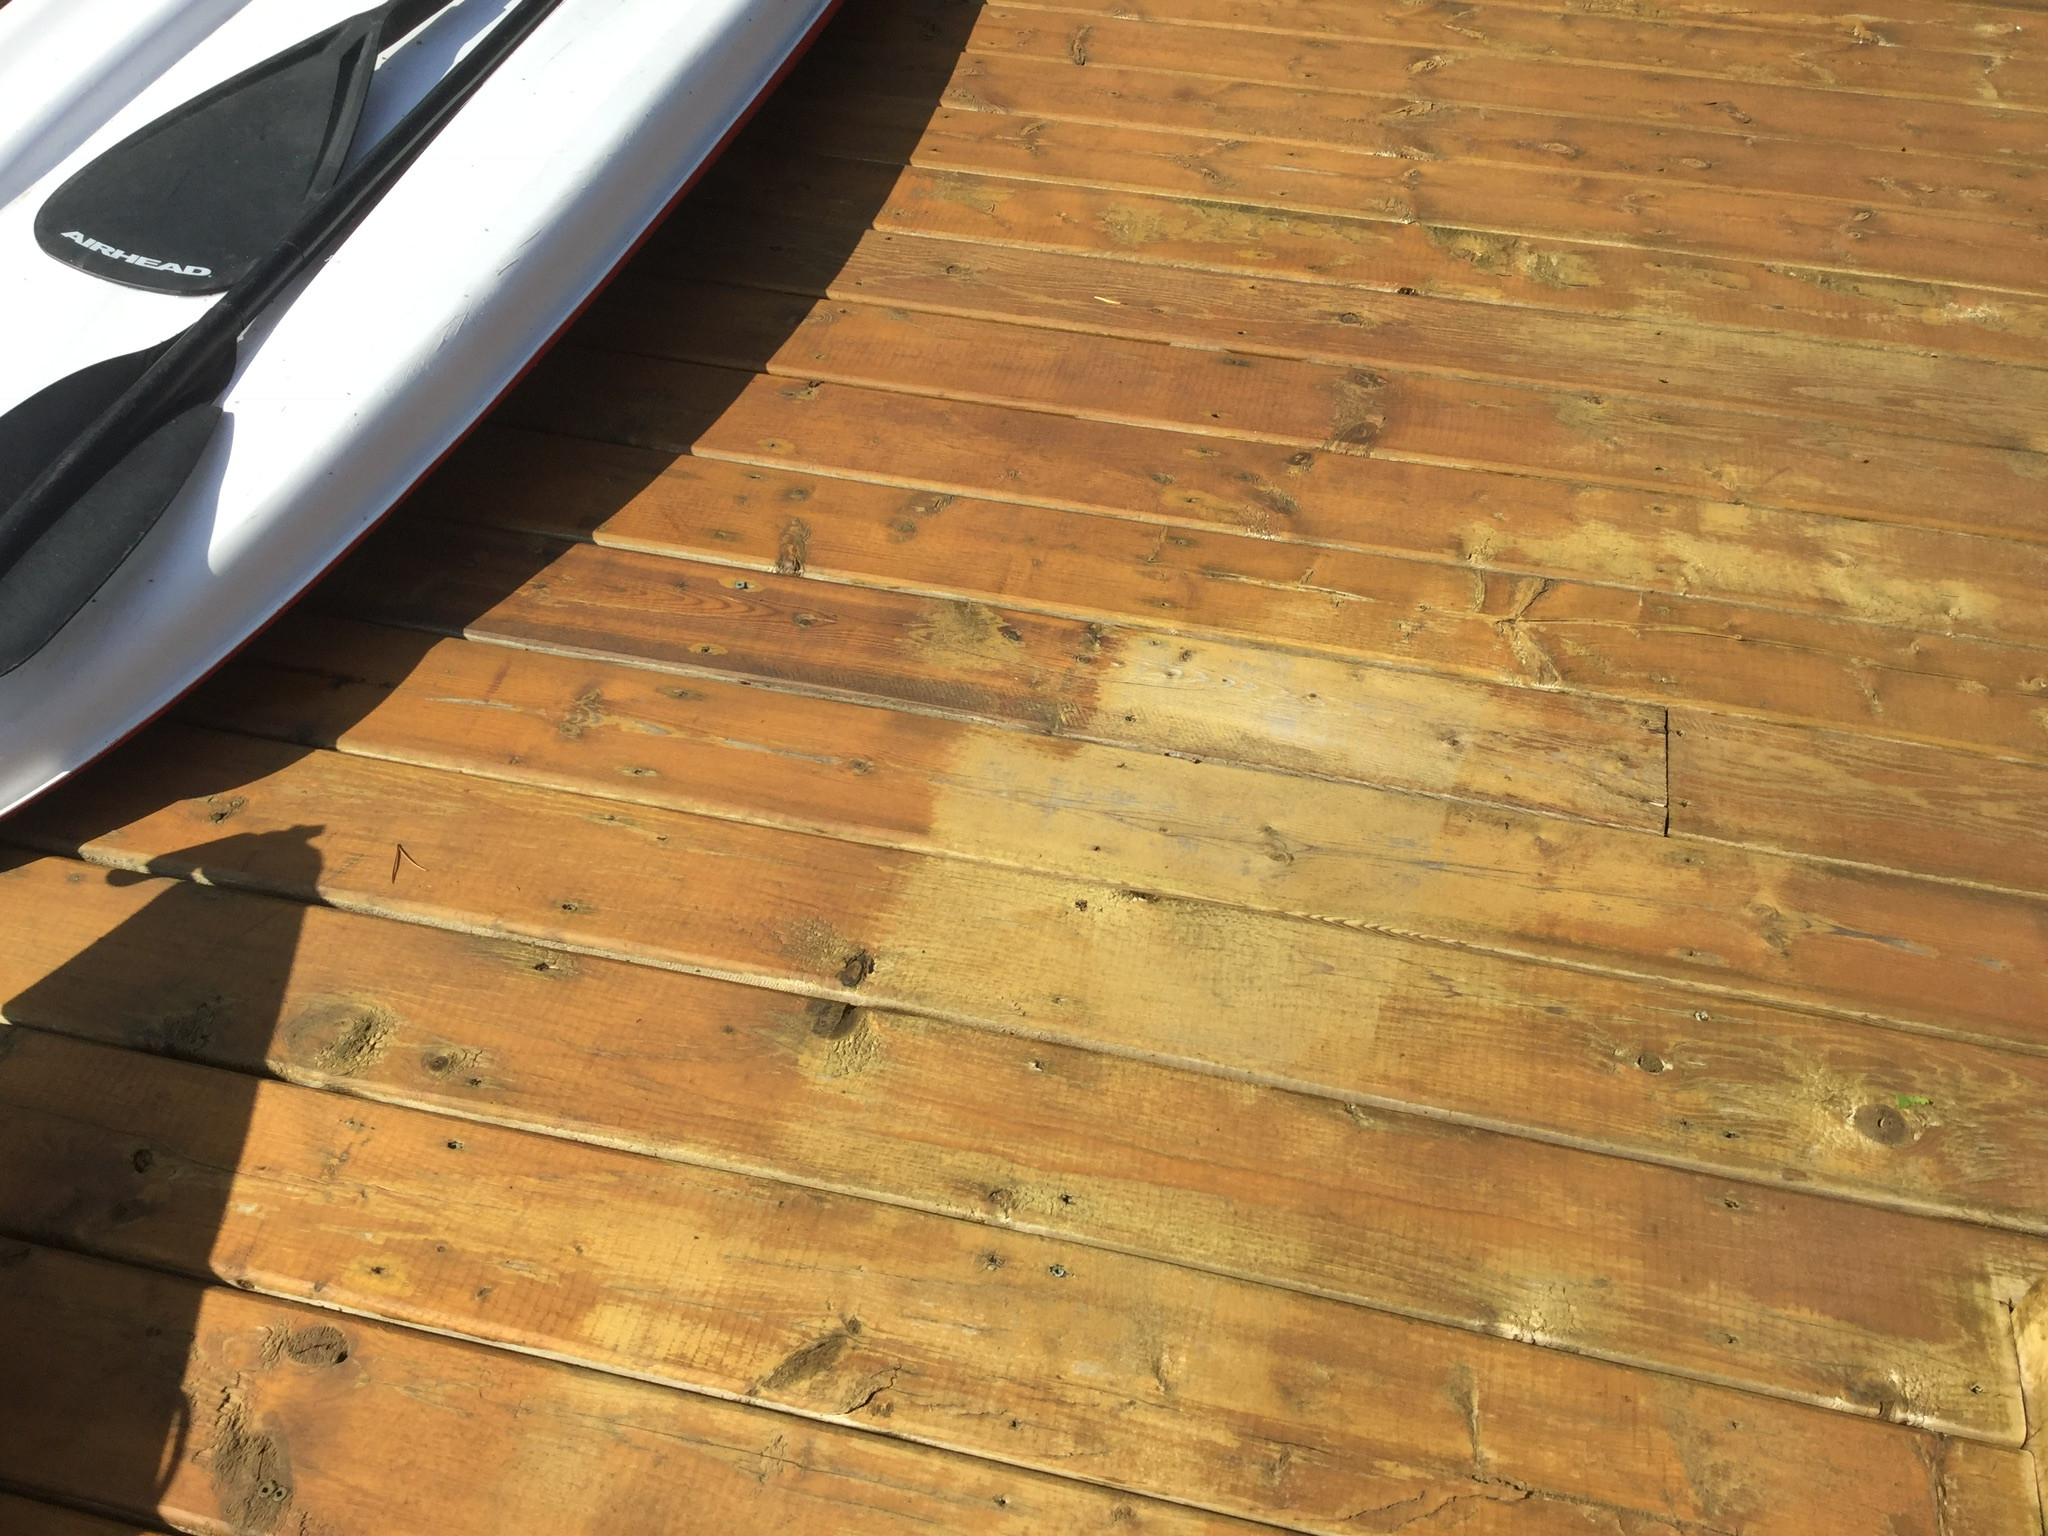 20 Popular How to Refurbish Hardwood Floors Yourself 2024 free download how to refurbish hardwood floors yourself of deck stripping removing an old deck stain best deck stain with 20480c22 ce3a 4e92 9579 ae22e2150447